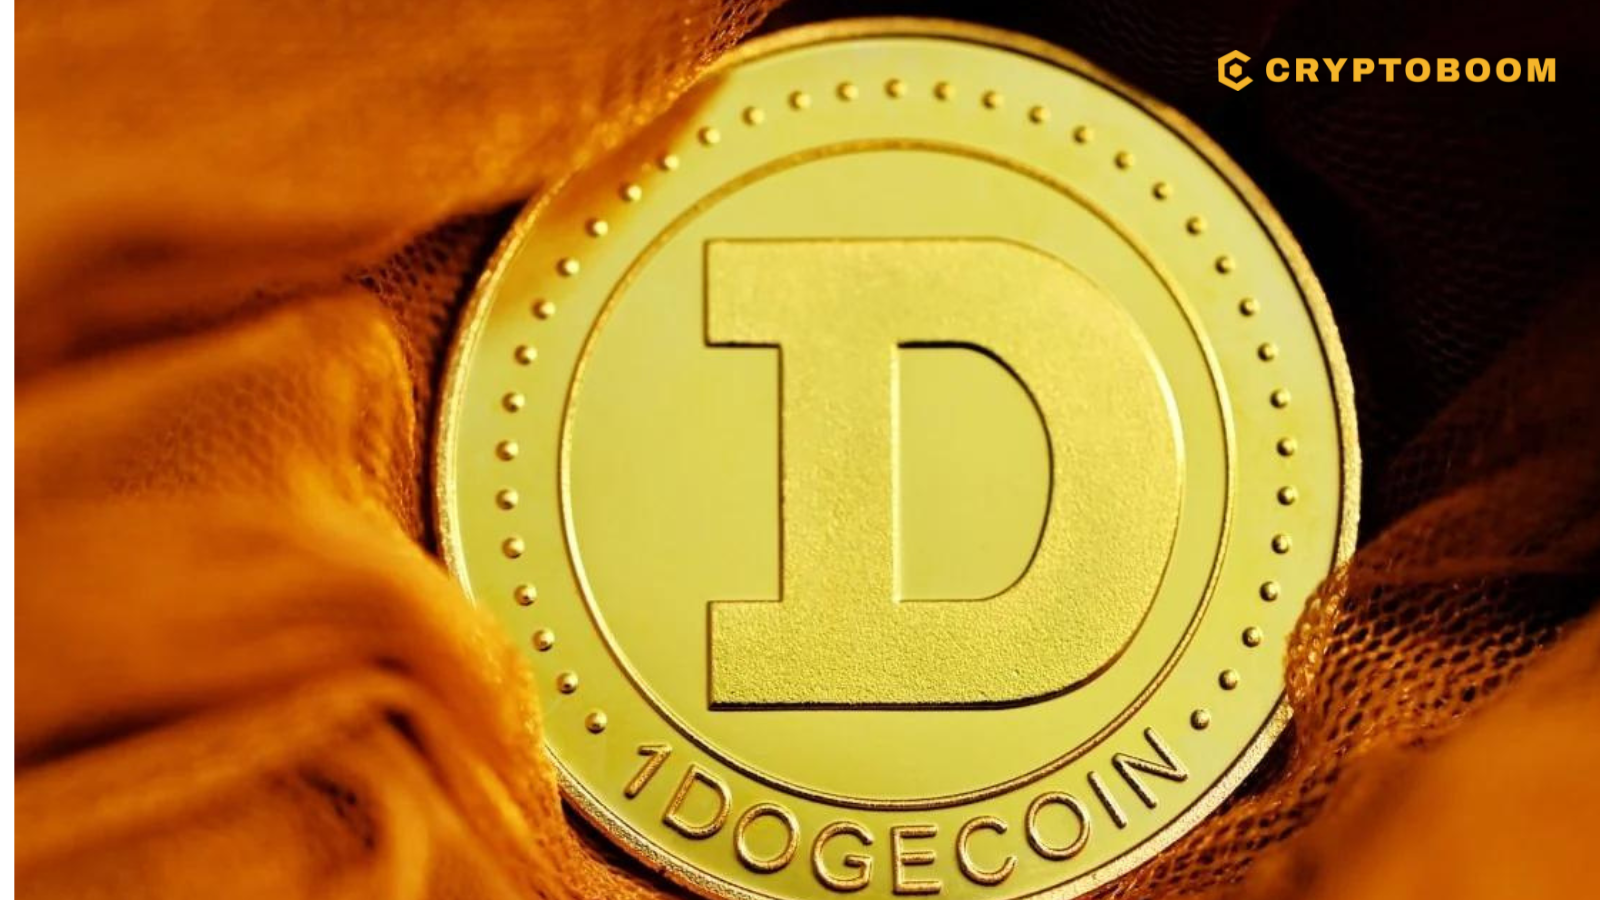 Dogecoin's Journey to $0.20: A Tale of Ups and Downs